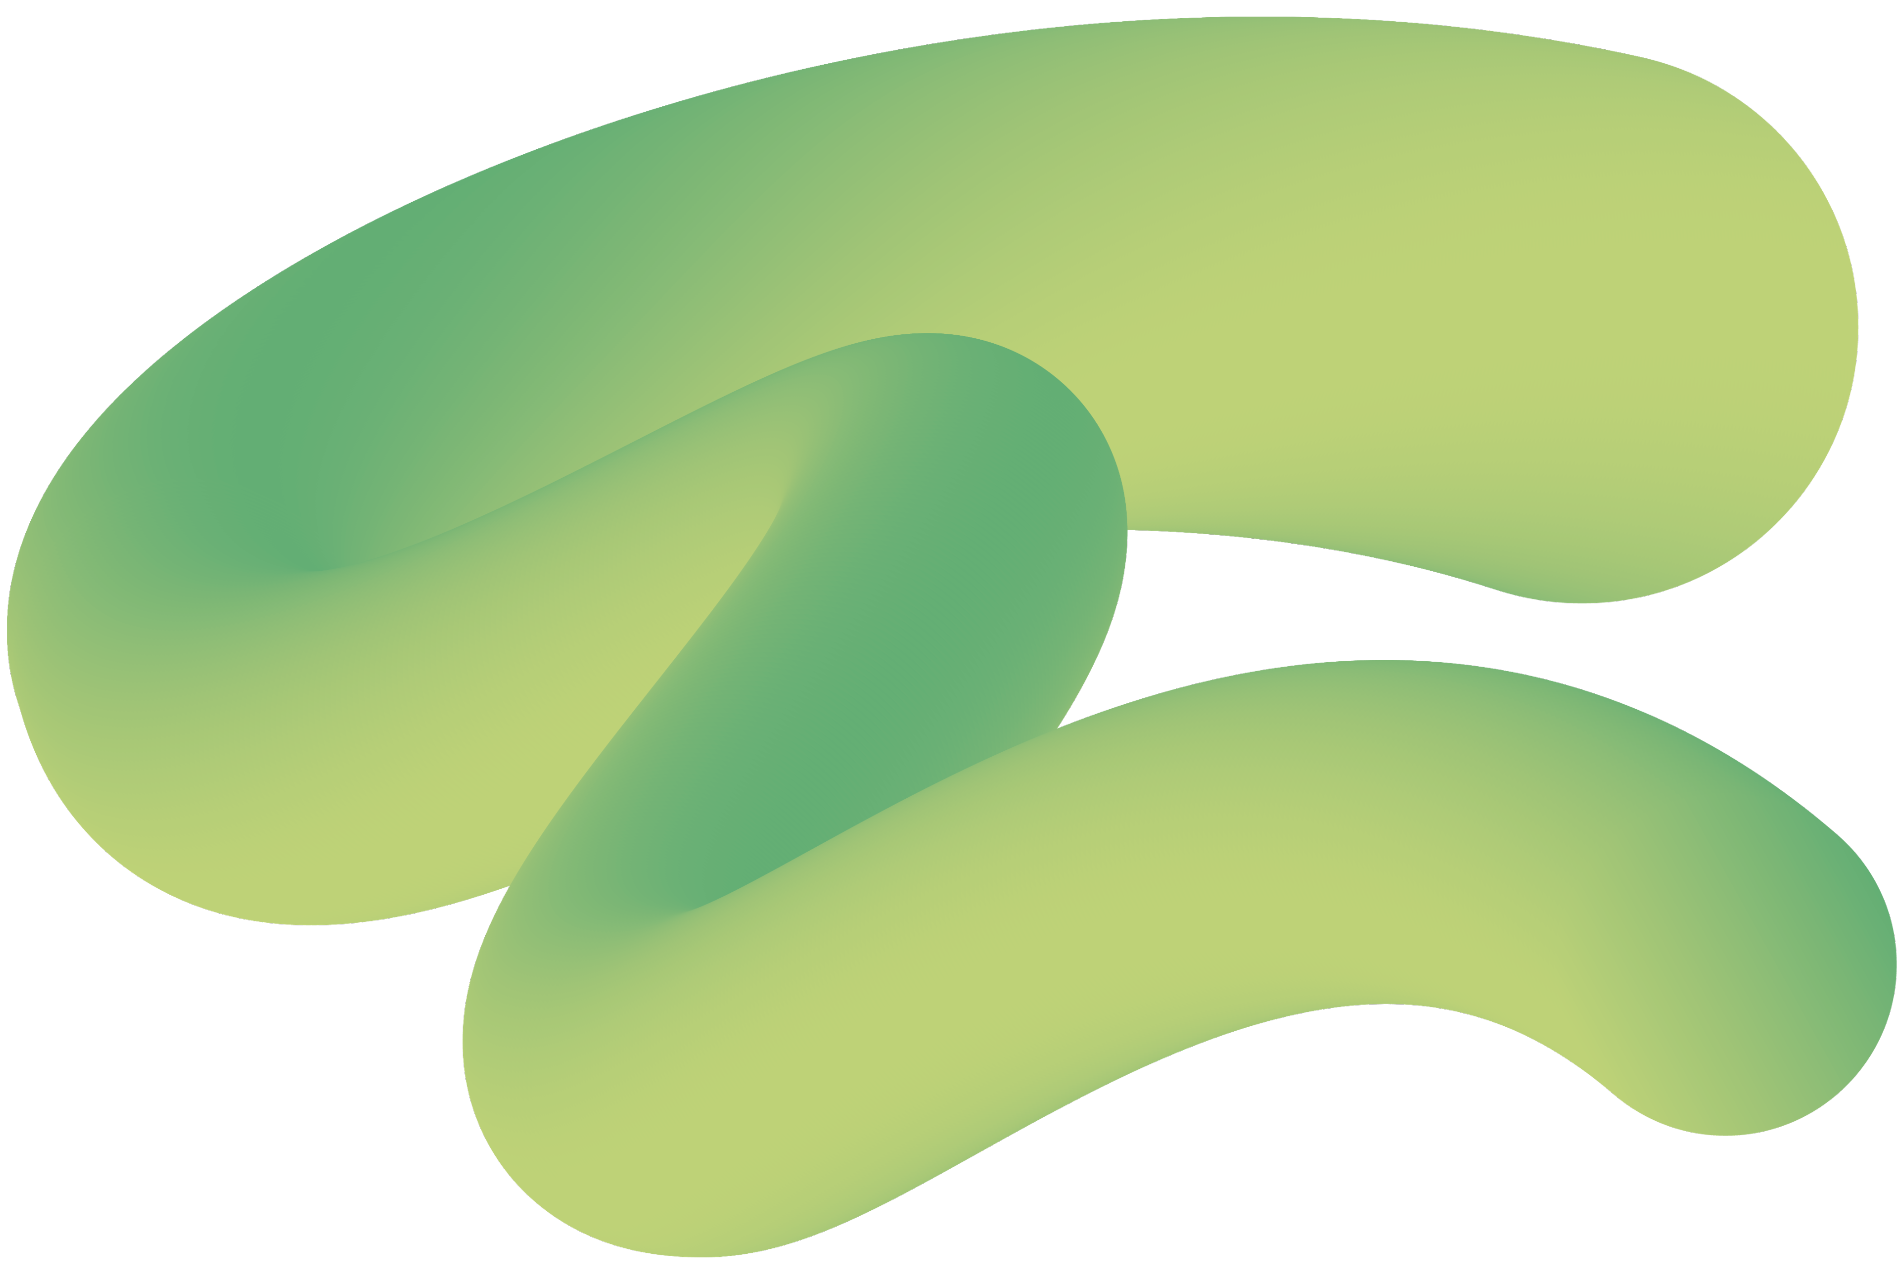 A 3D abstract shape with smooth curves in green to yellow gradient tones, resembling two interlocking curved bands.